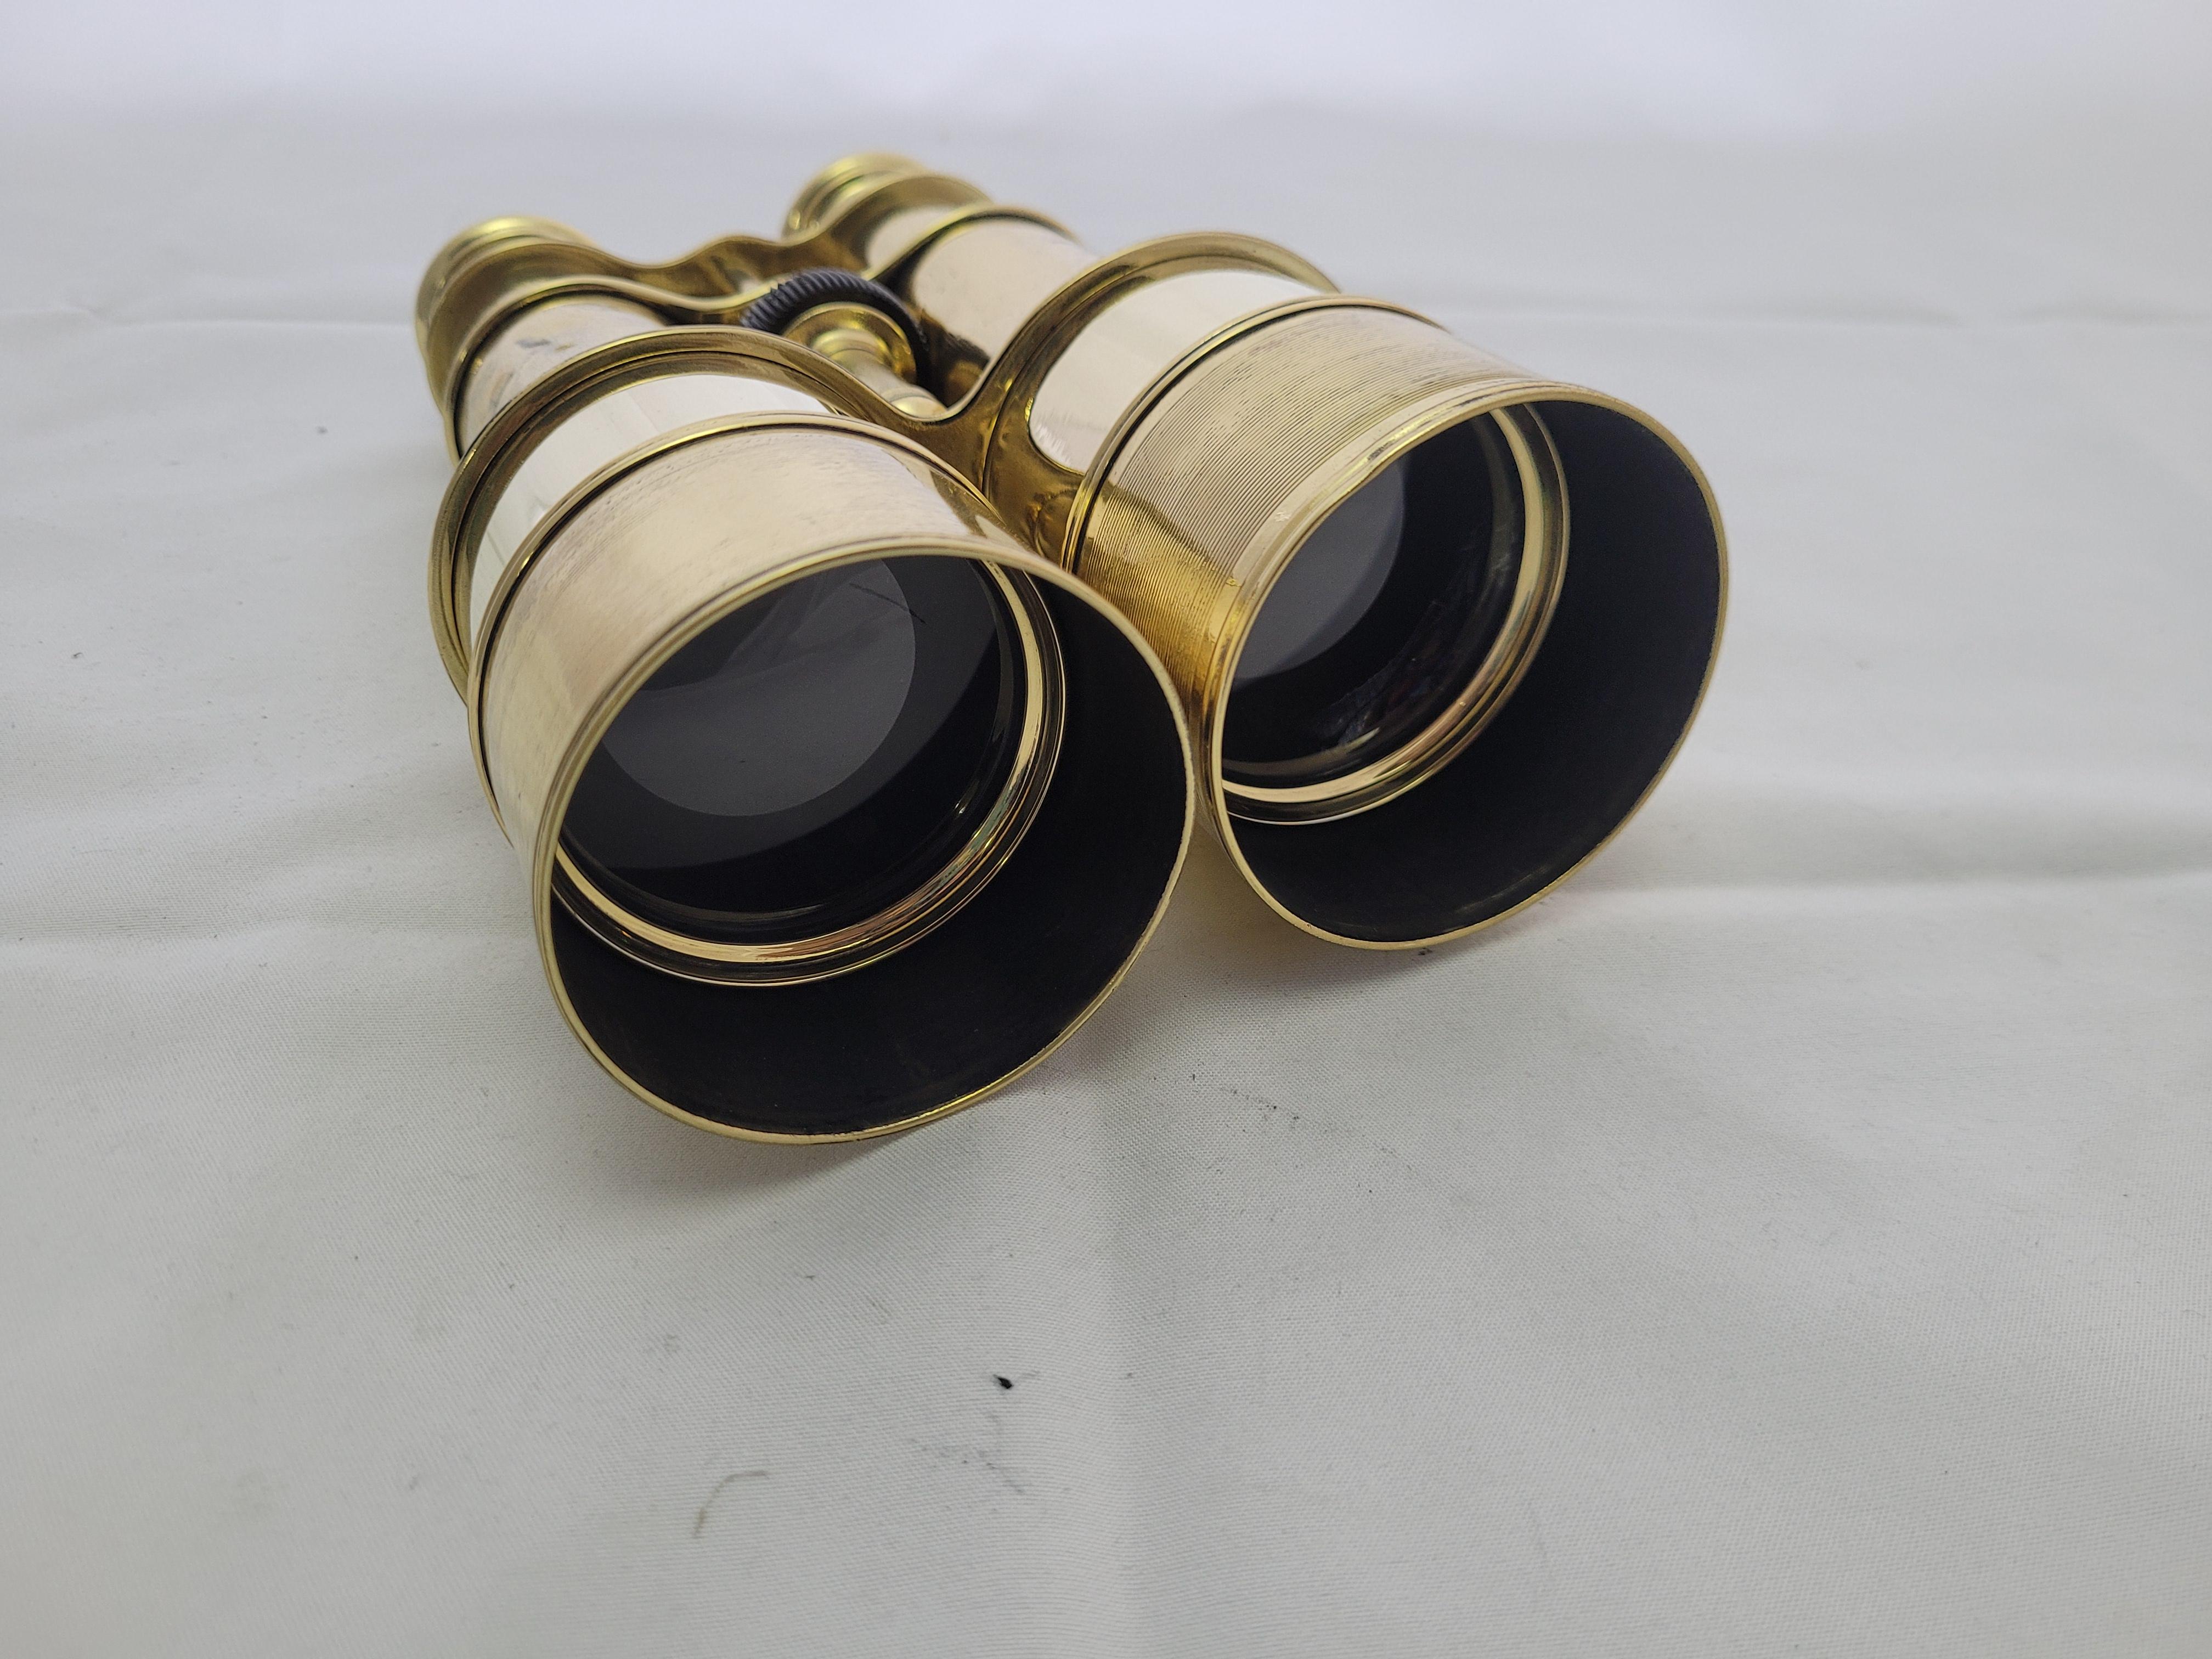 French Yachting Binoculars by Lemaire Fabt, Paris TEL004 2